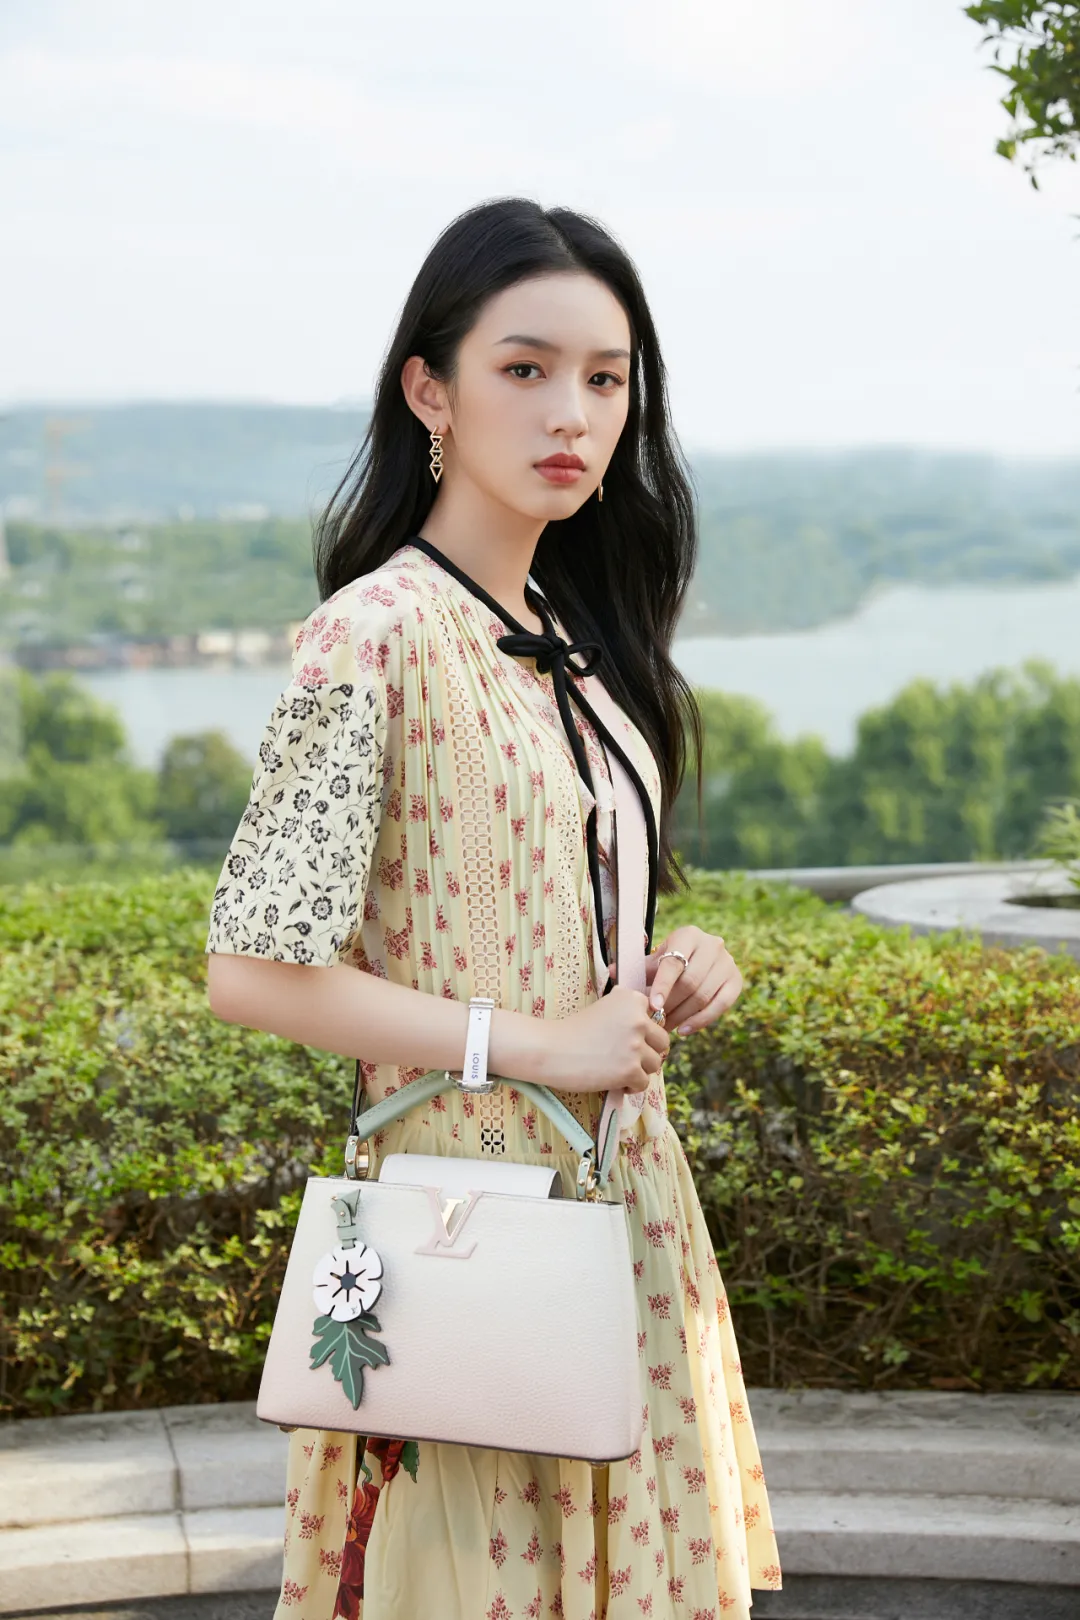 Louis Vuitton on X: @TWNGhesquiere In an ode to Louis Vuitton's heritage  style codes, the emblematic Capucines handbag reveals a distinctive  feminine allure while embodied by Elaine Zhong. #ElaineZhong #LVCapucines  #LouisVuitton  /